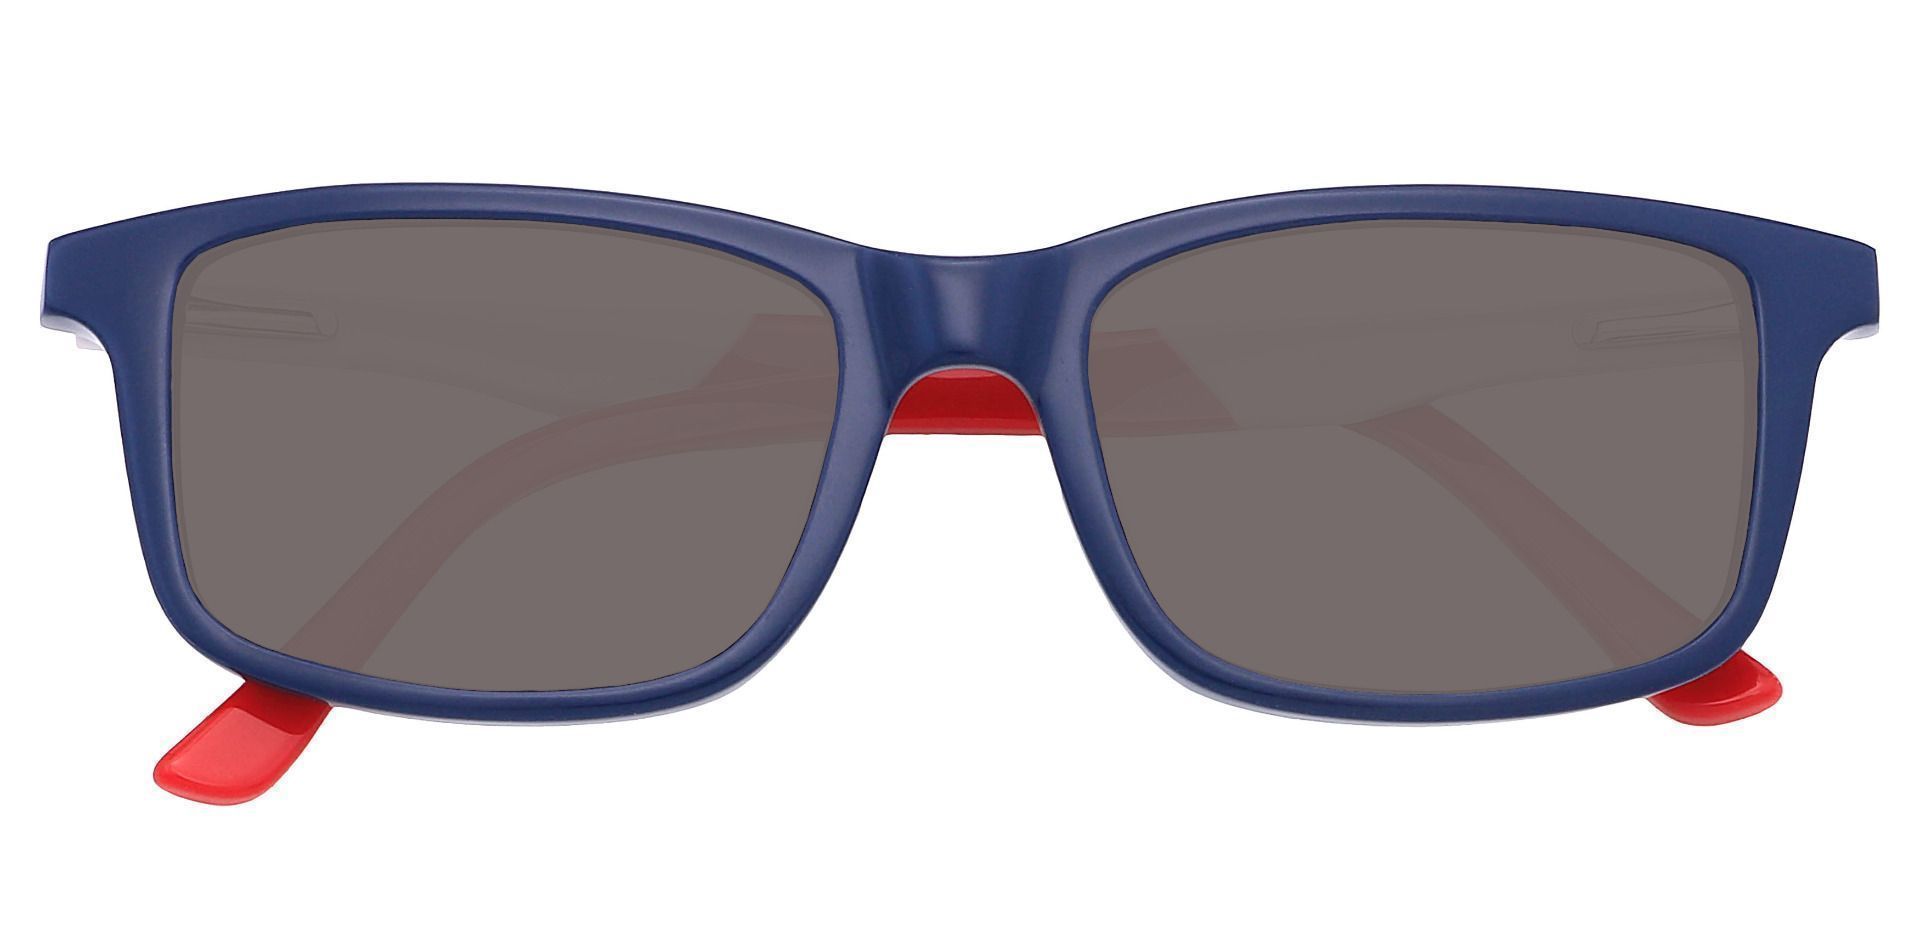 Titletown Rectangle Non-Rx Sunglasses - Blue Frame With Gray Lenses